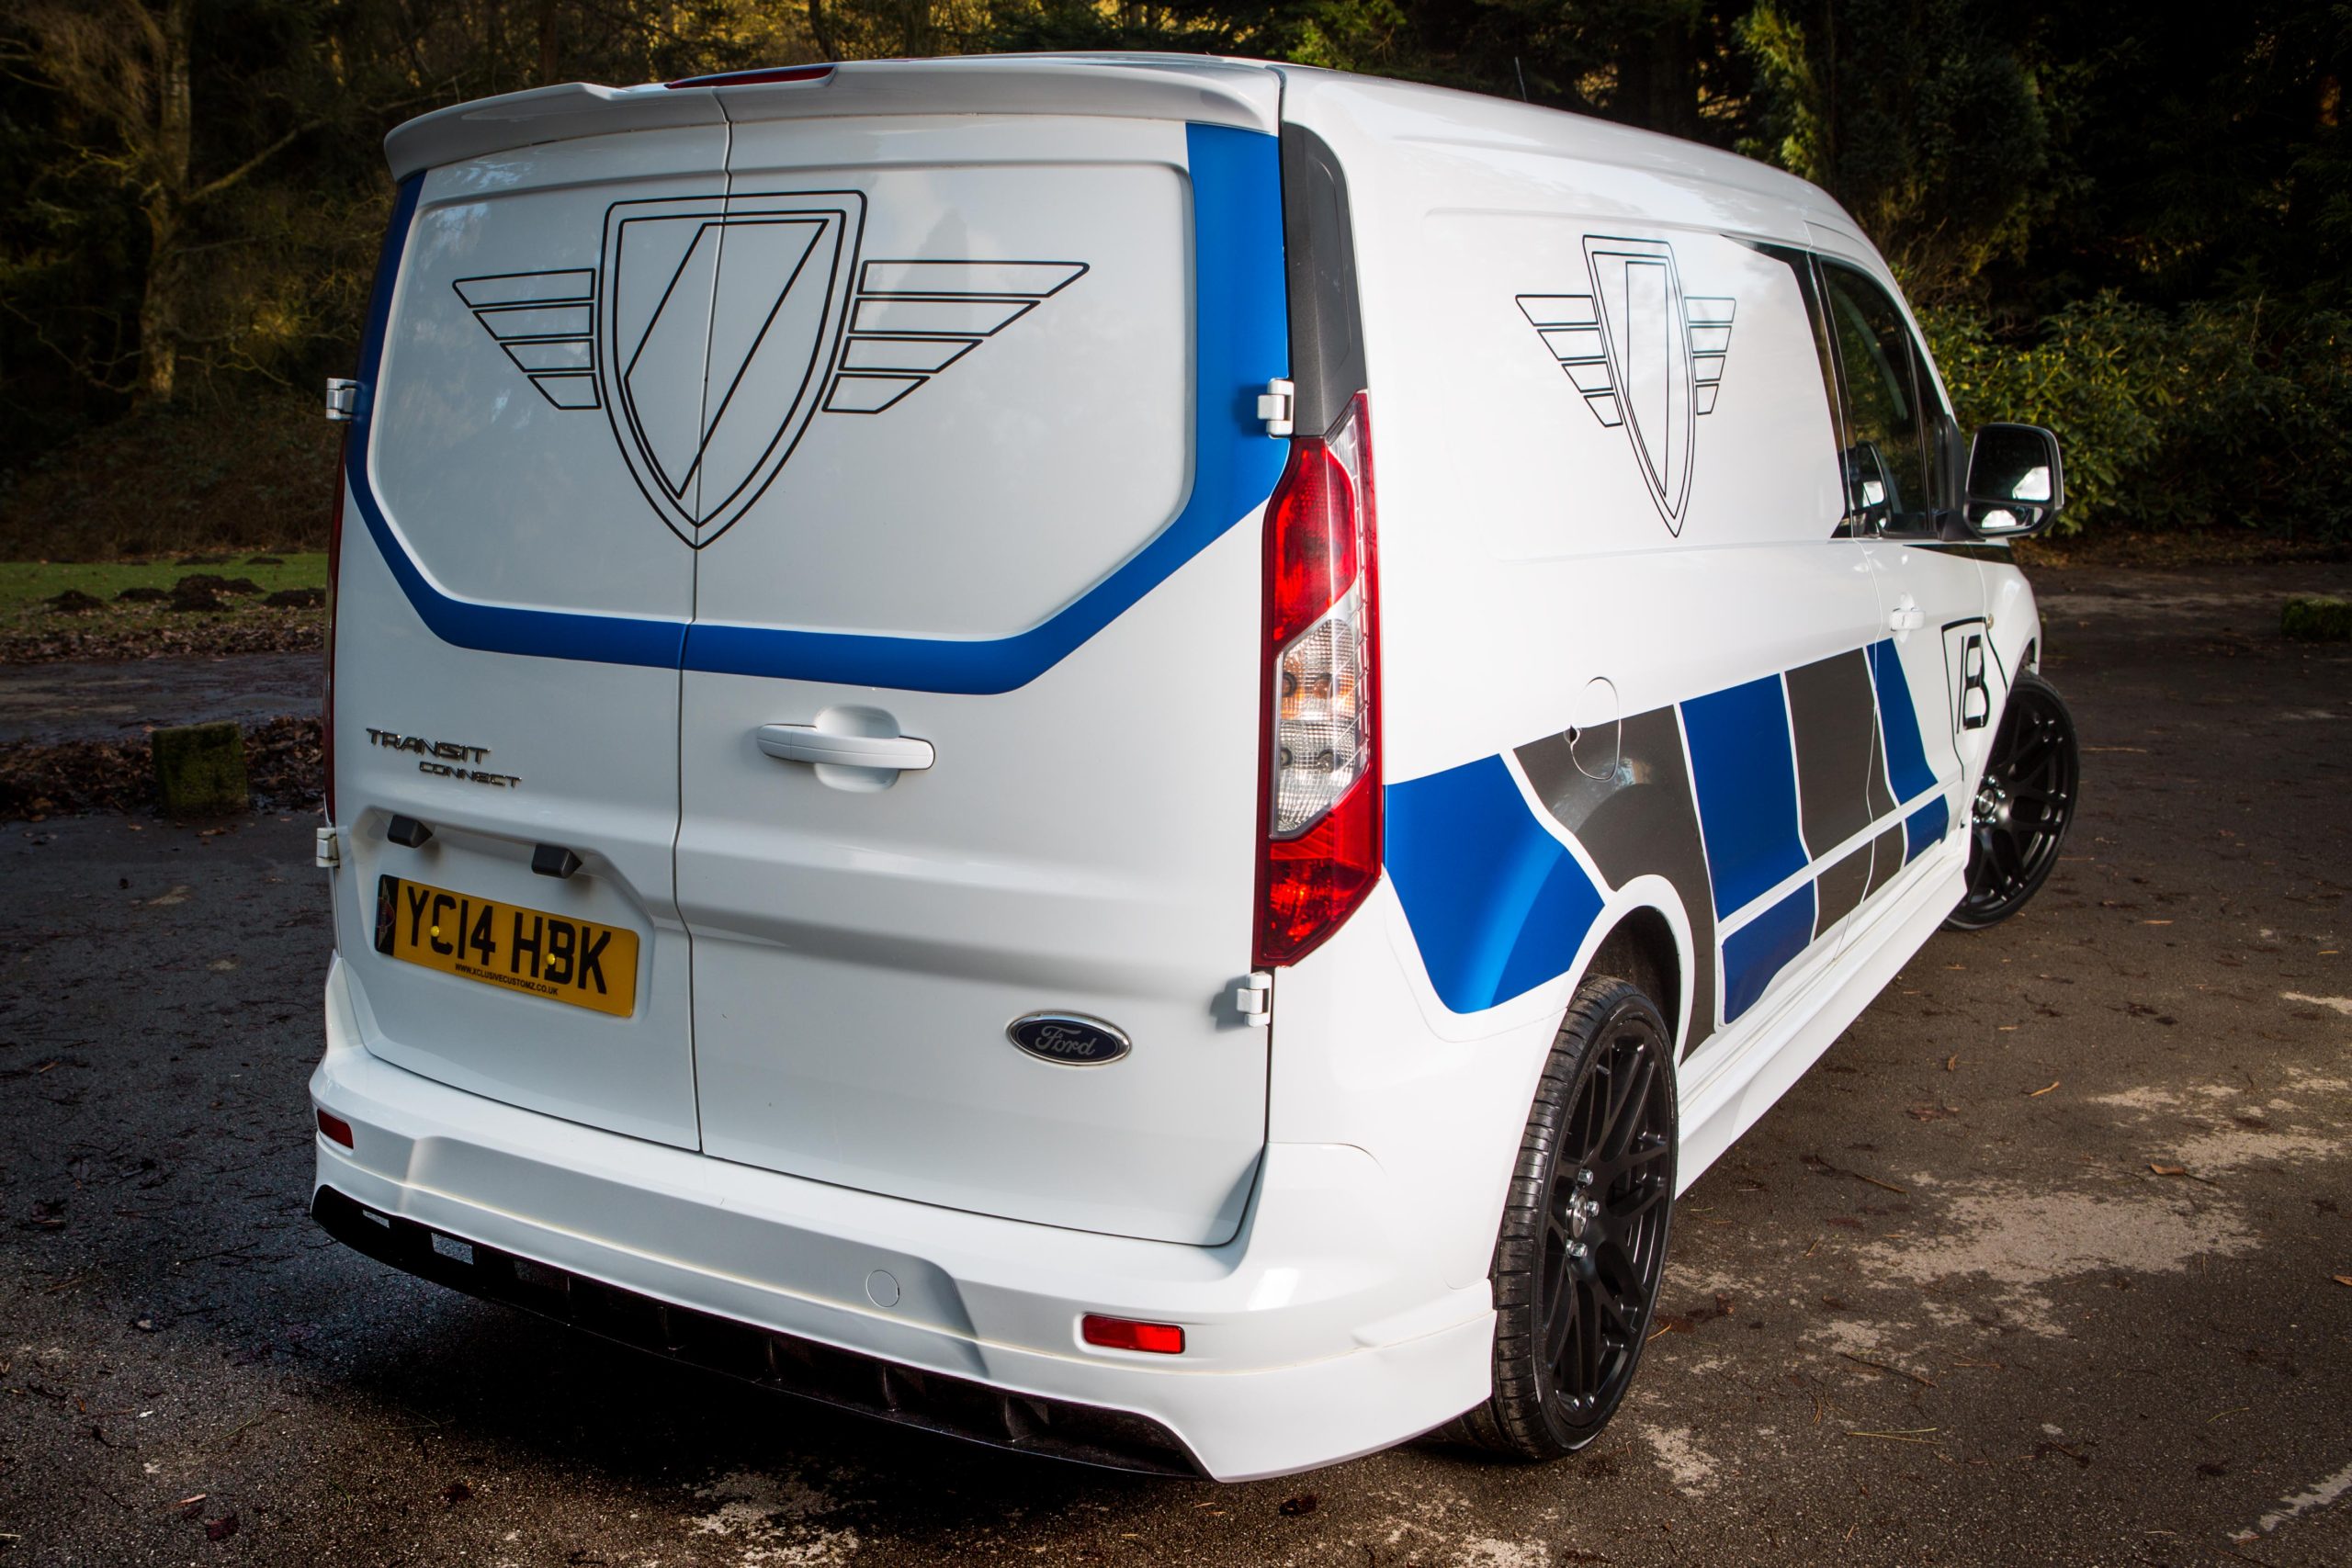 Here is a photo of the rear of the Ford Transit Connect with the "xclusive Bodykit" Attached